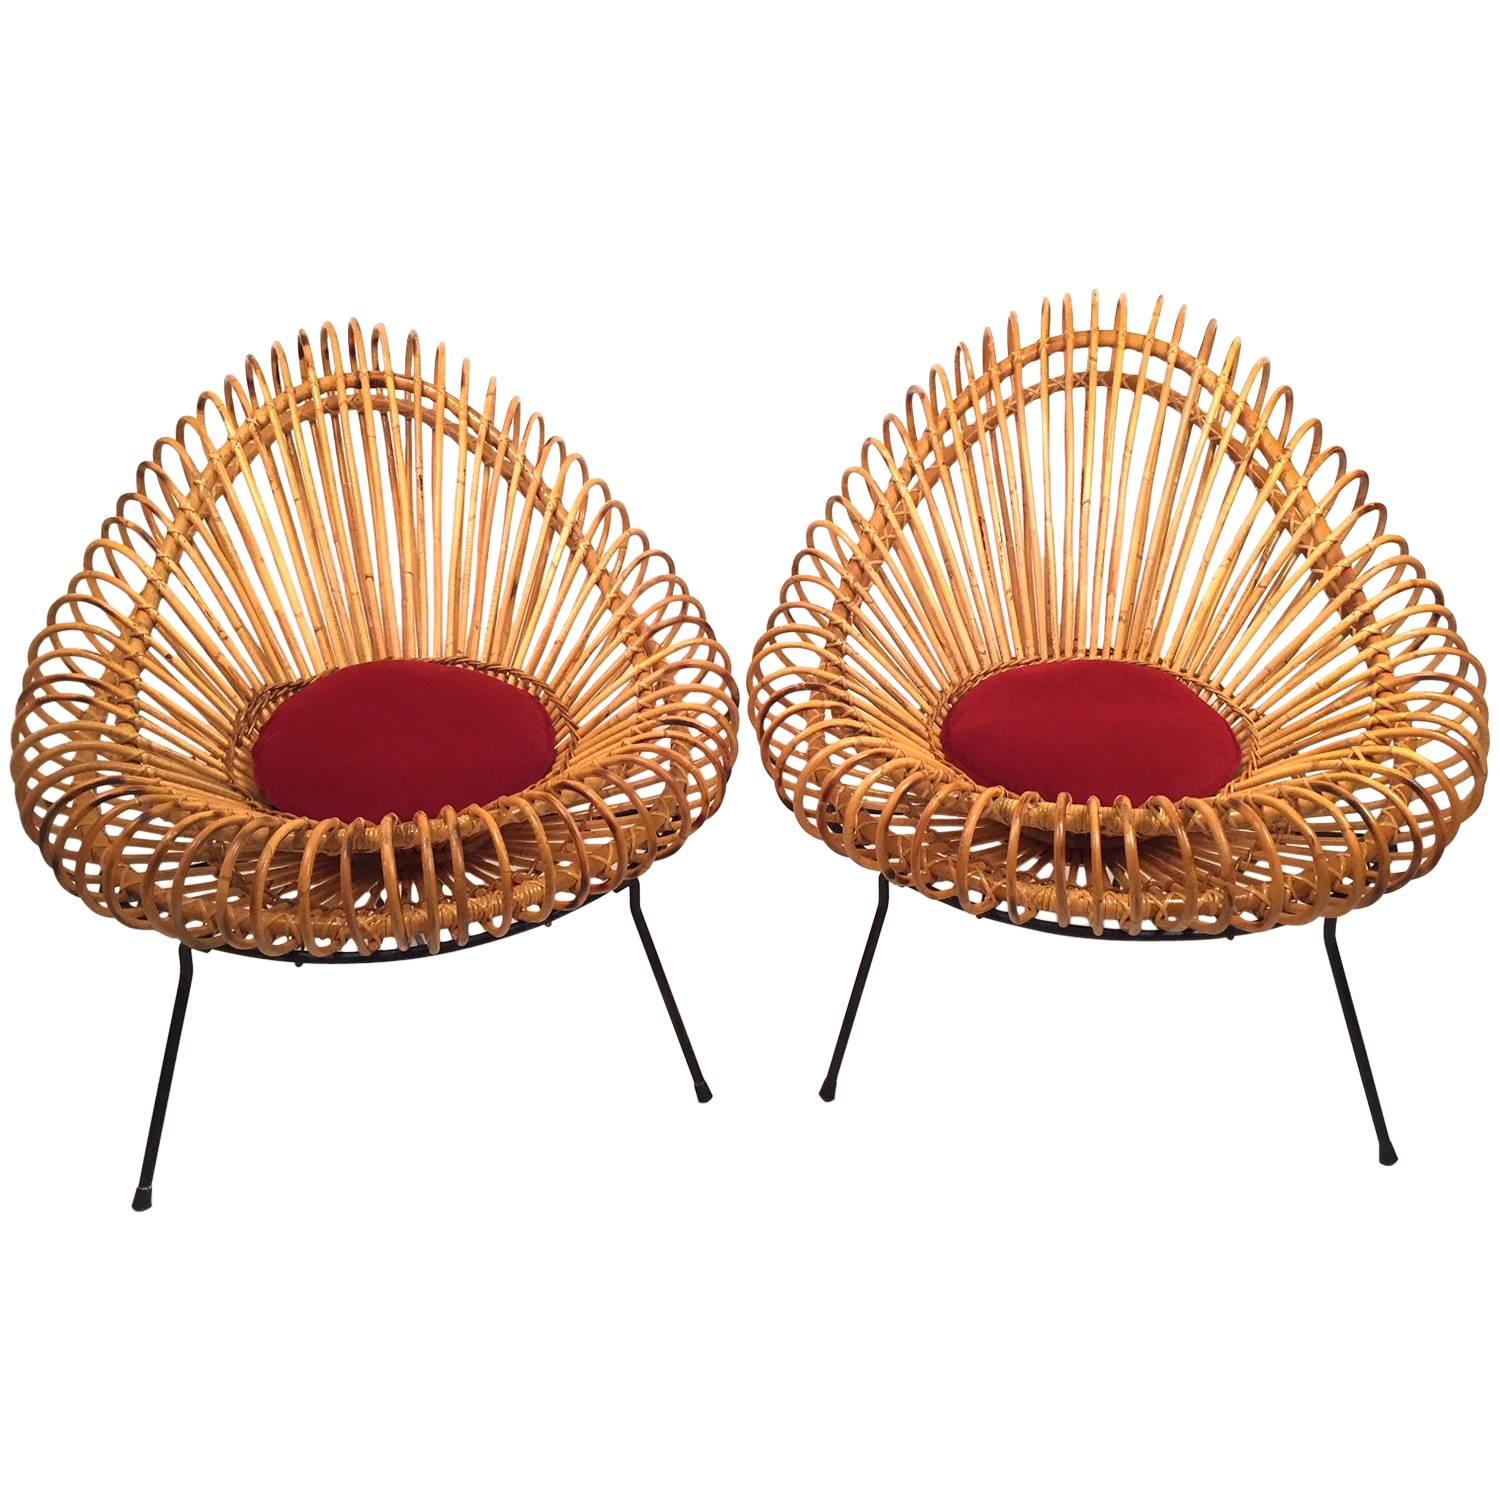 Pair of Janine Abraham and Dirk Jan Rol Basketware Lounge Chairs